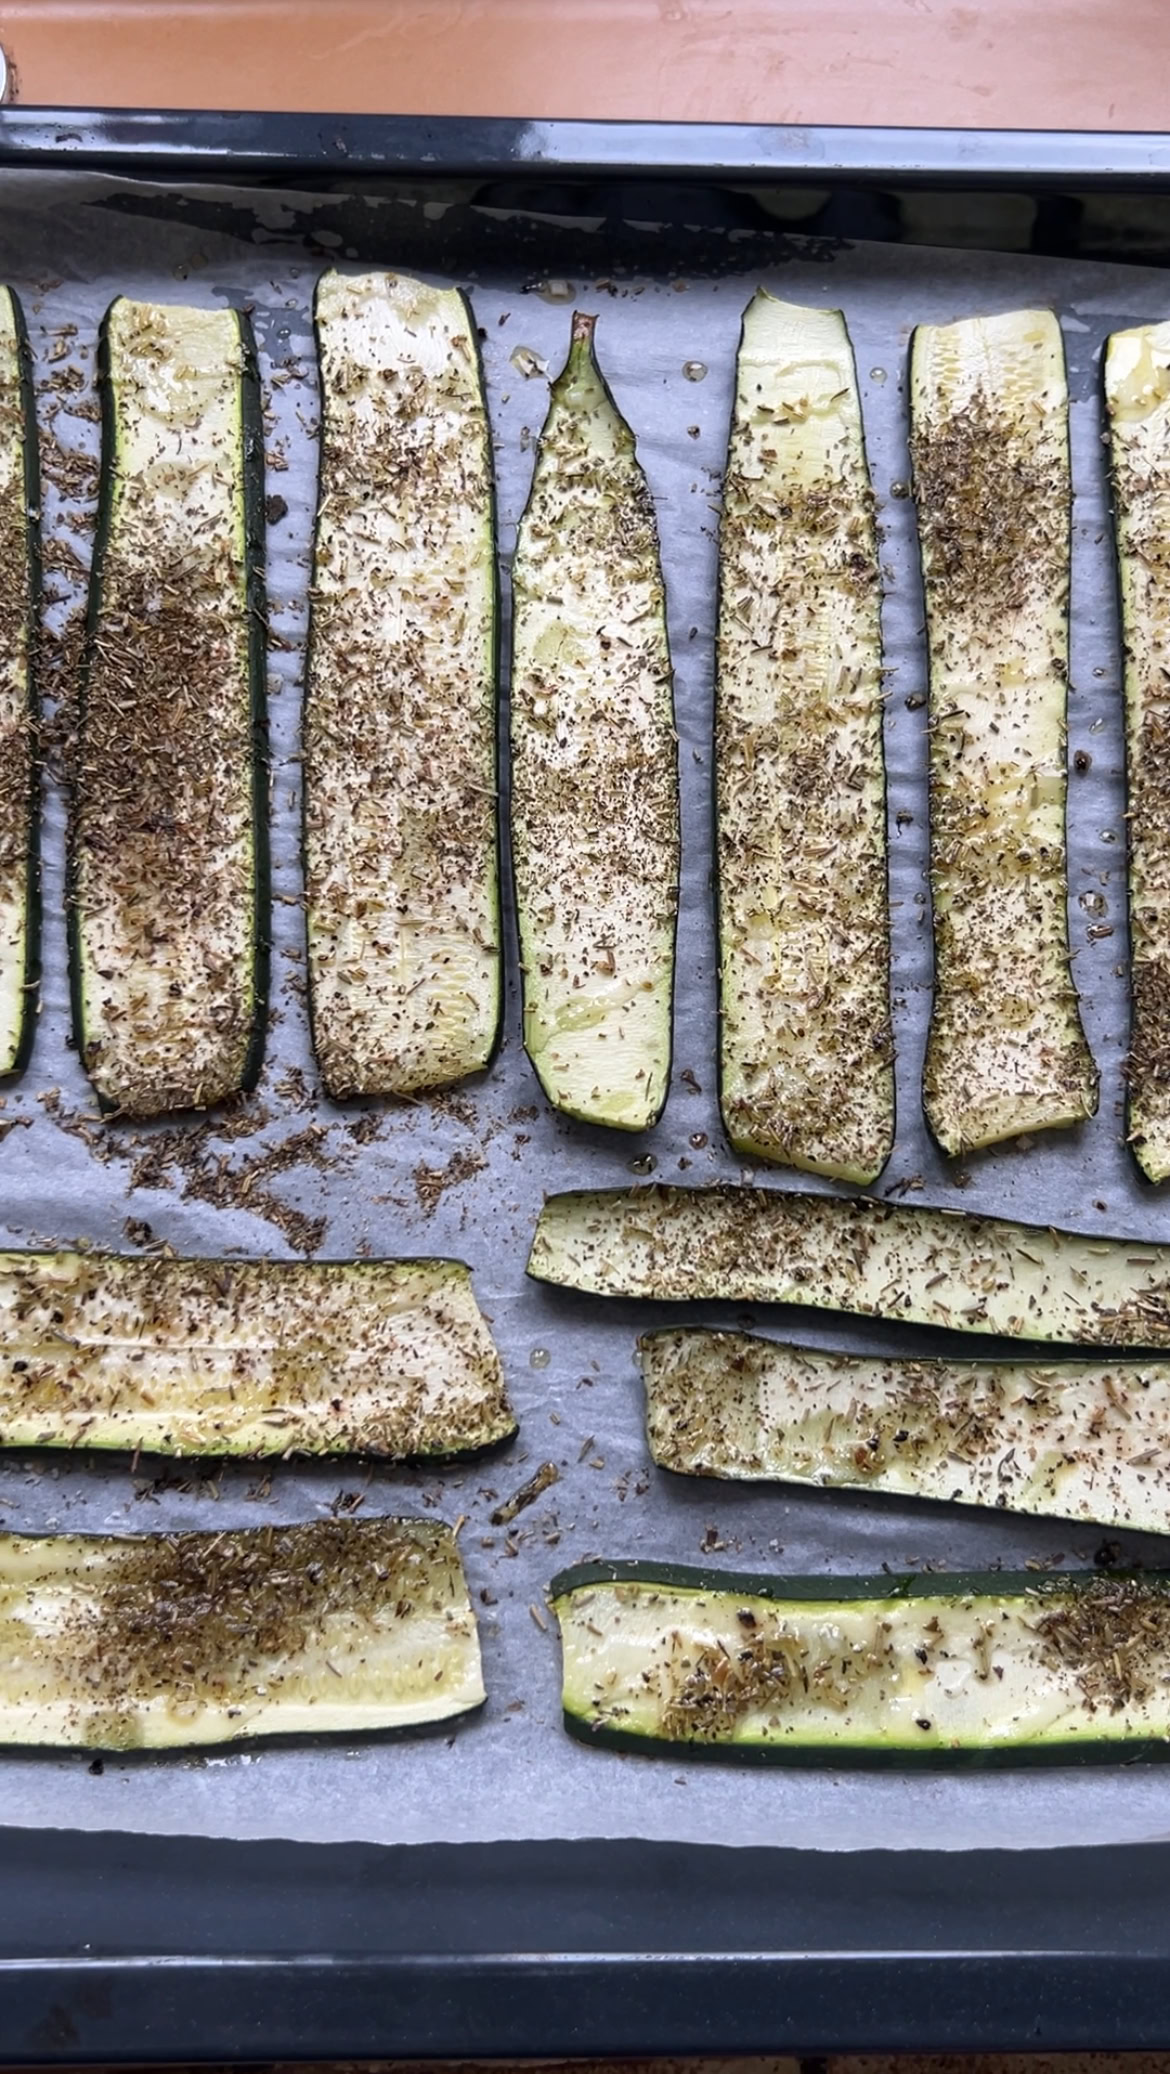 Seasoned zucchini slices, placed on a parchment paper-lined baking sheet after baking.